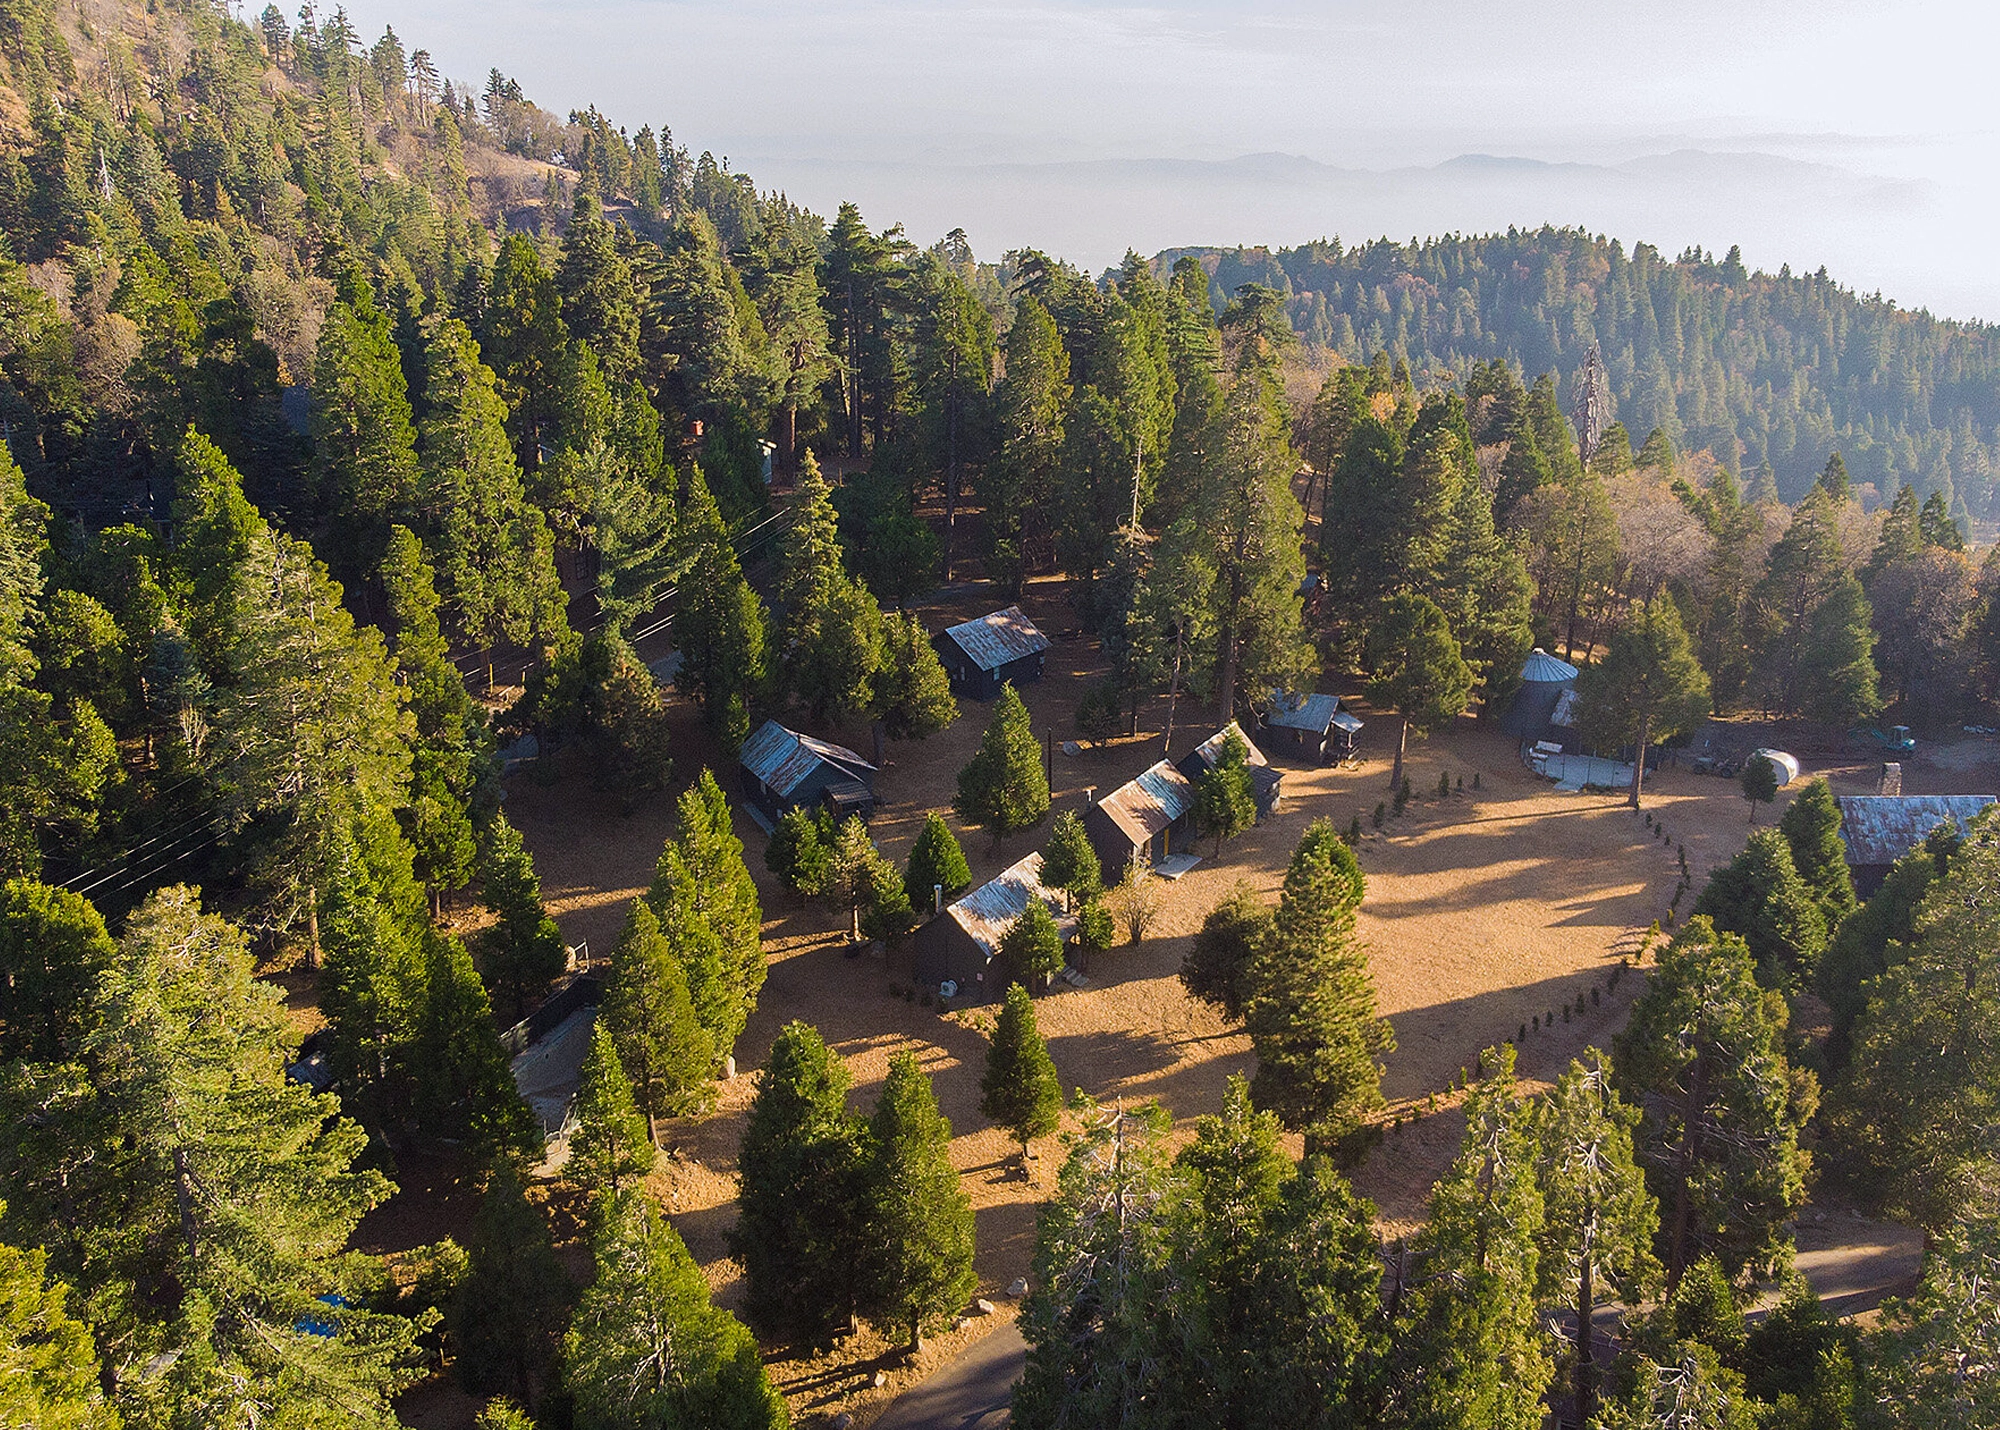 Birds eye view of The Perch's cluster of cabins in a conifer forest near Lake Arrowhead, California.